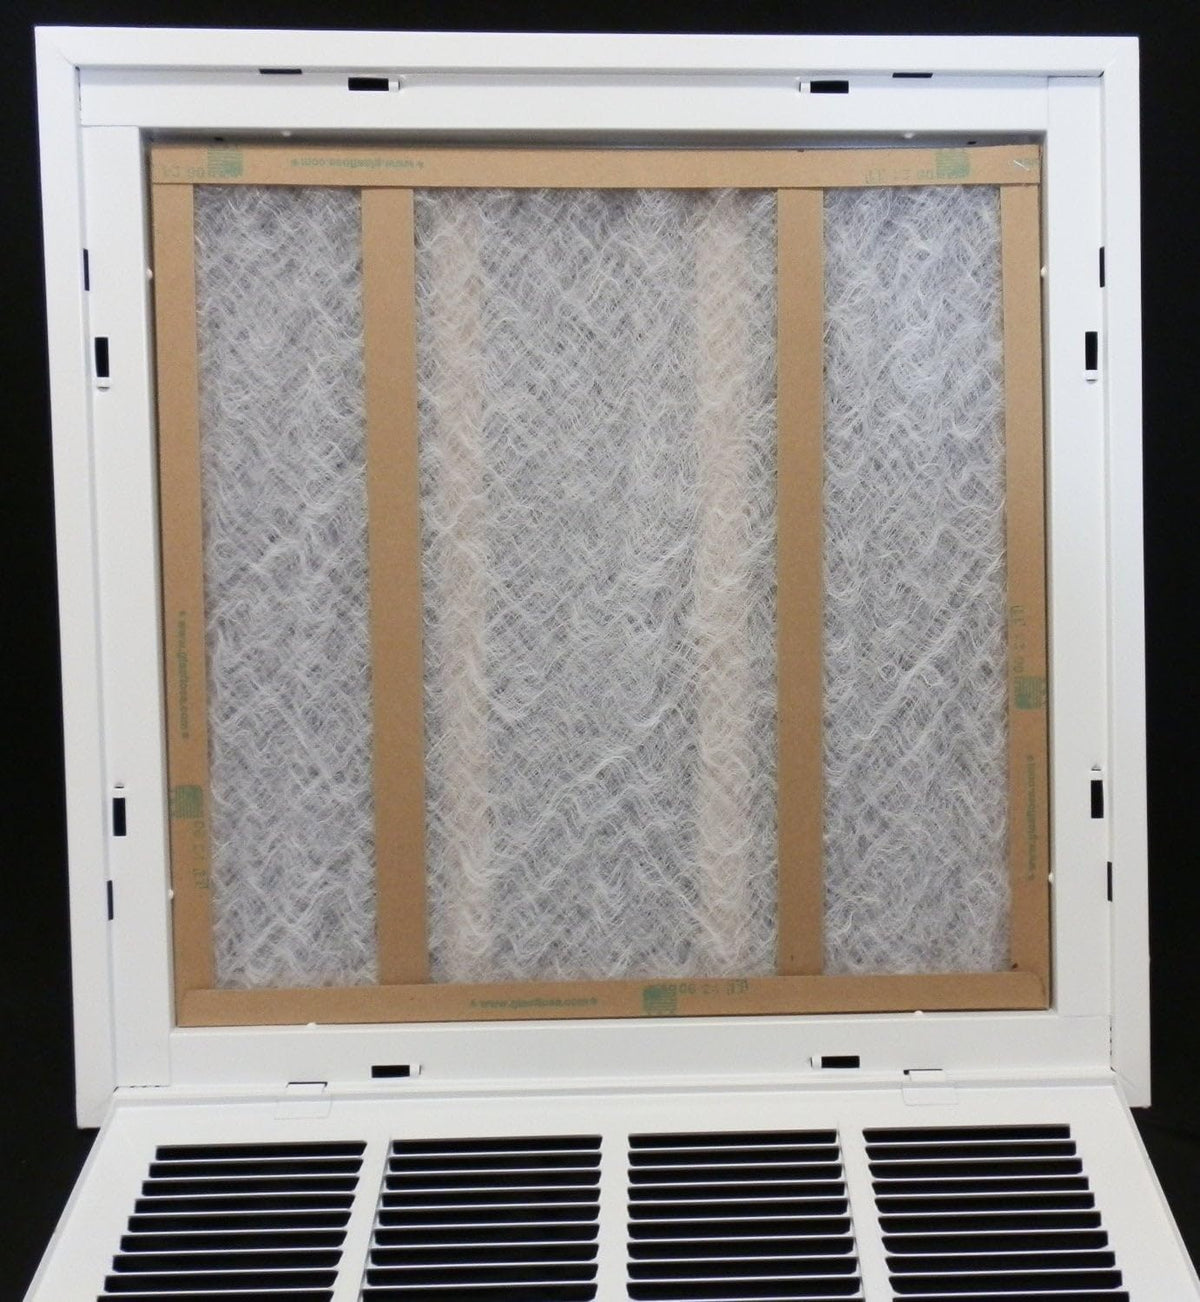 16&quot; X 16&quot; Steel Return Air Filter Grille for 1&quot; Filter - Fixed Hinged - [Outer Dimensions: 18 5/8&quot; X 18 5/8&quot;]